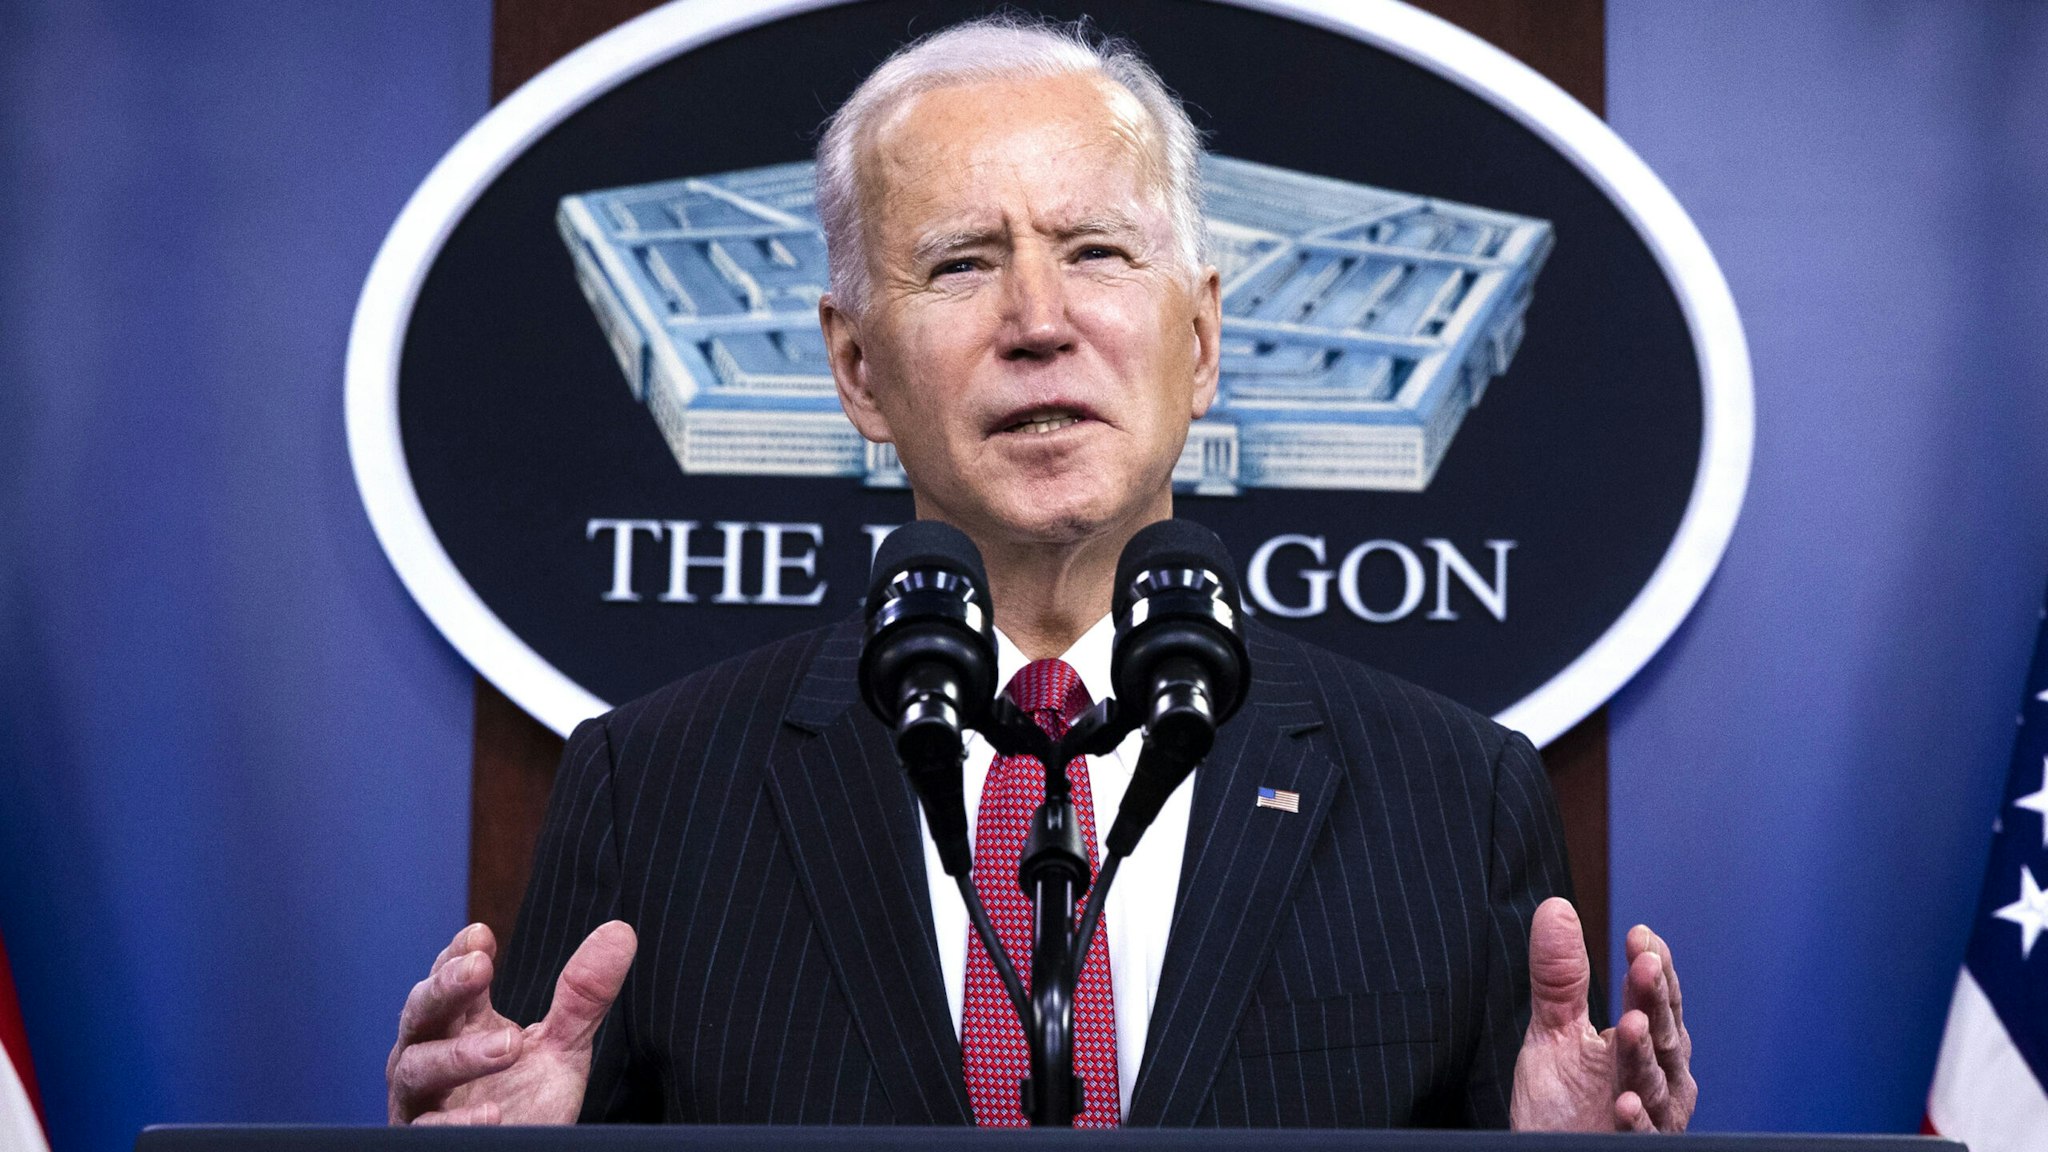 U.S. President Joe Biden speaks at the Pentagon in Arlington, Virginia, U.S., on Wednesday, Feb. 10, 2021. Biden today said his administration will sanction military leaders in Myanmar linked to this month's coup and will ensure the country's military leadership can't access about $1 billion in government funds held in the U.S.